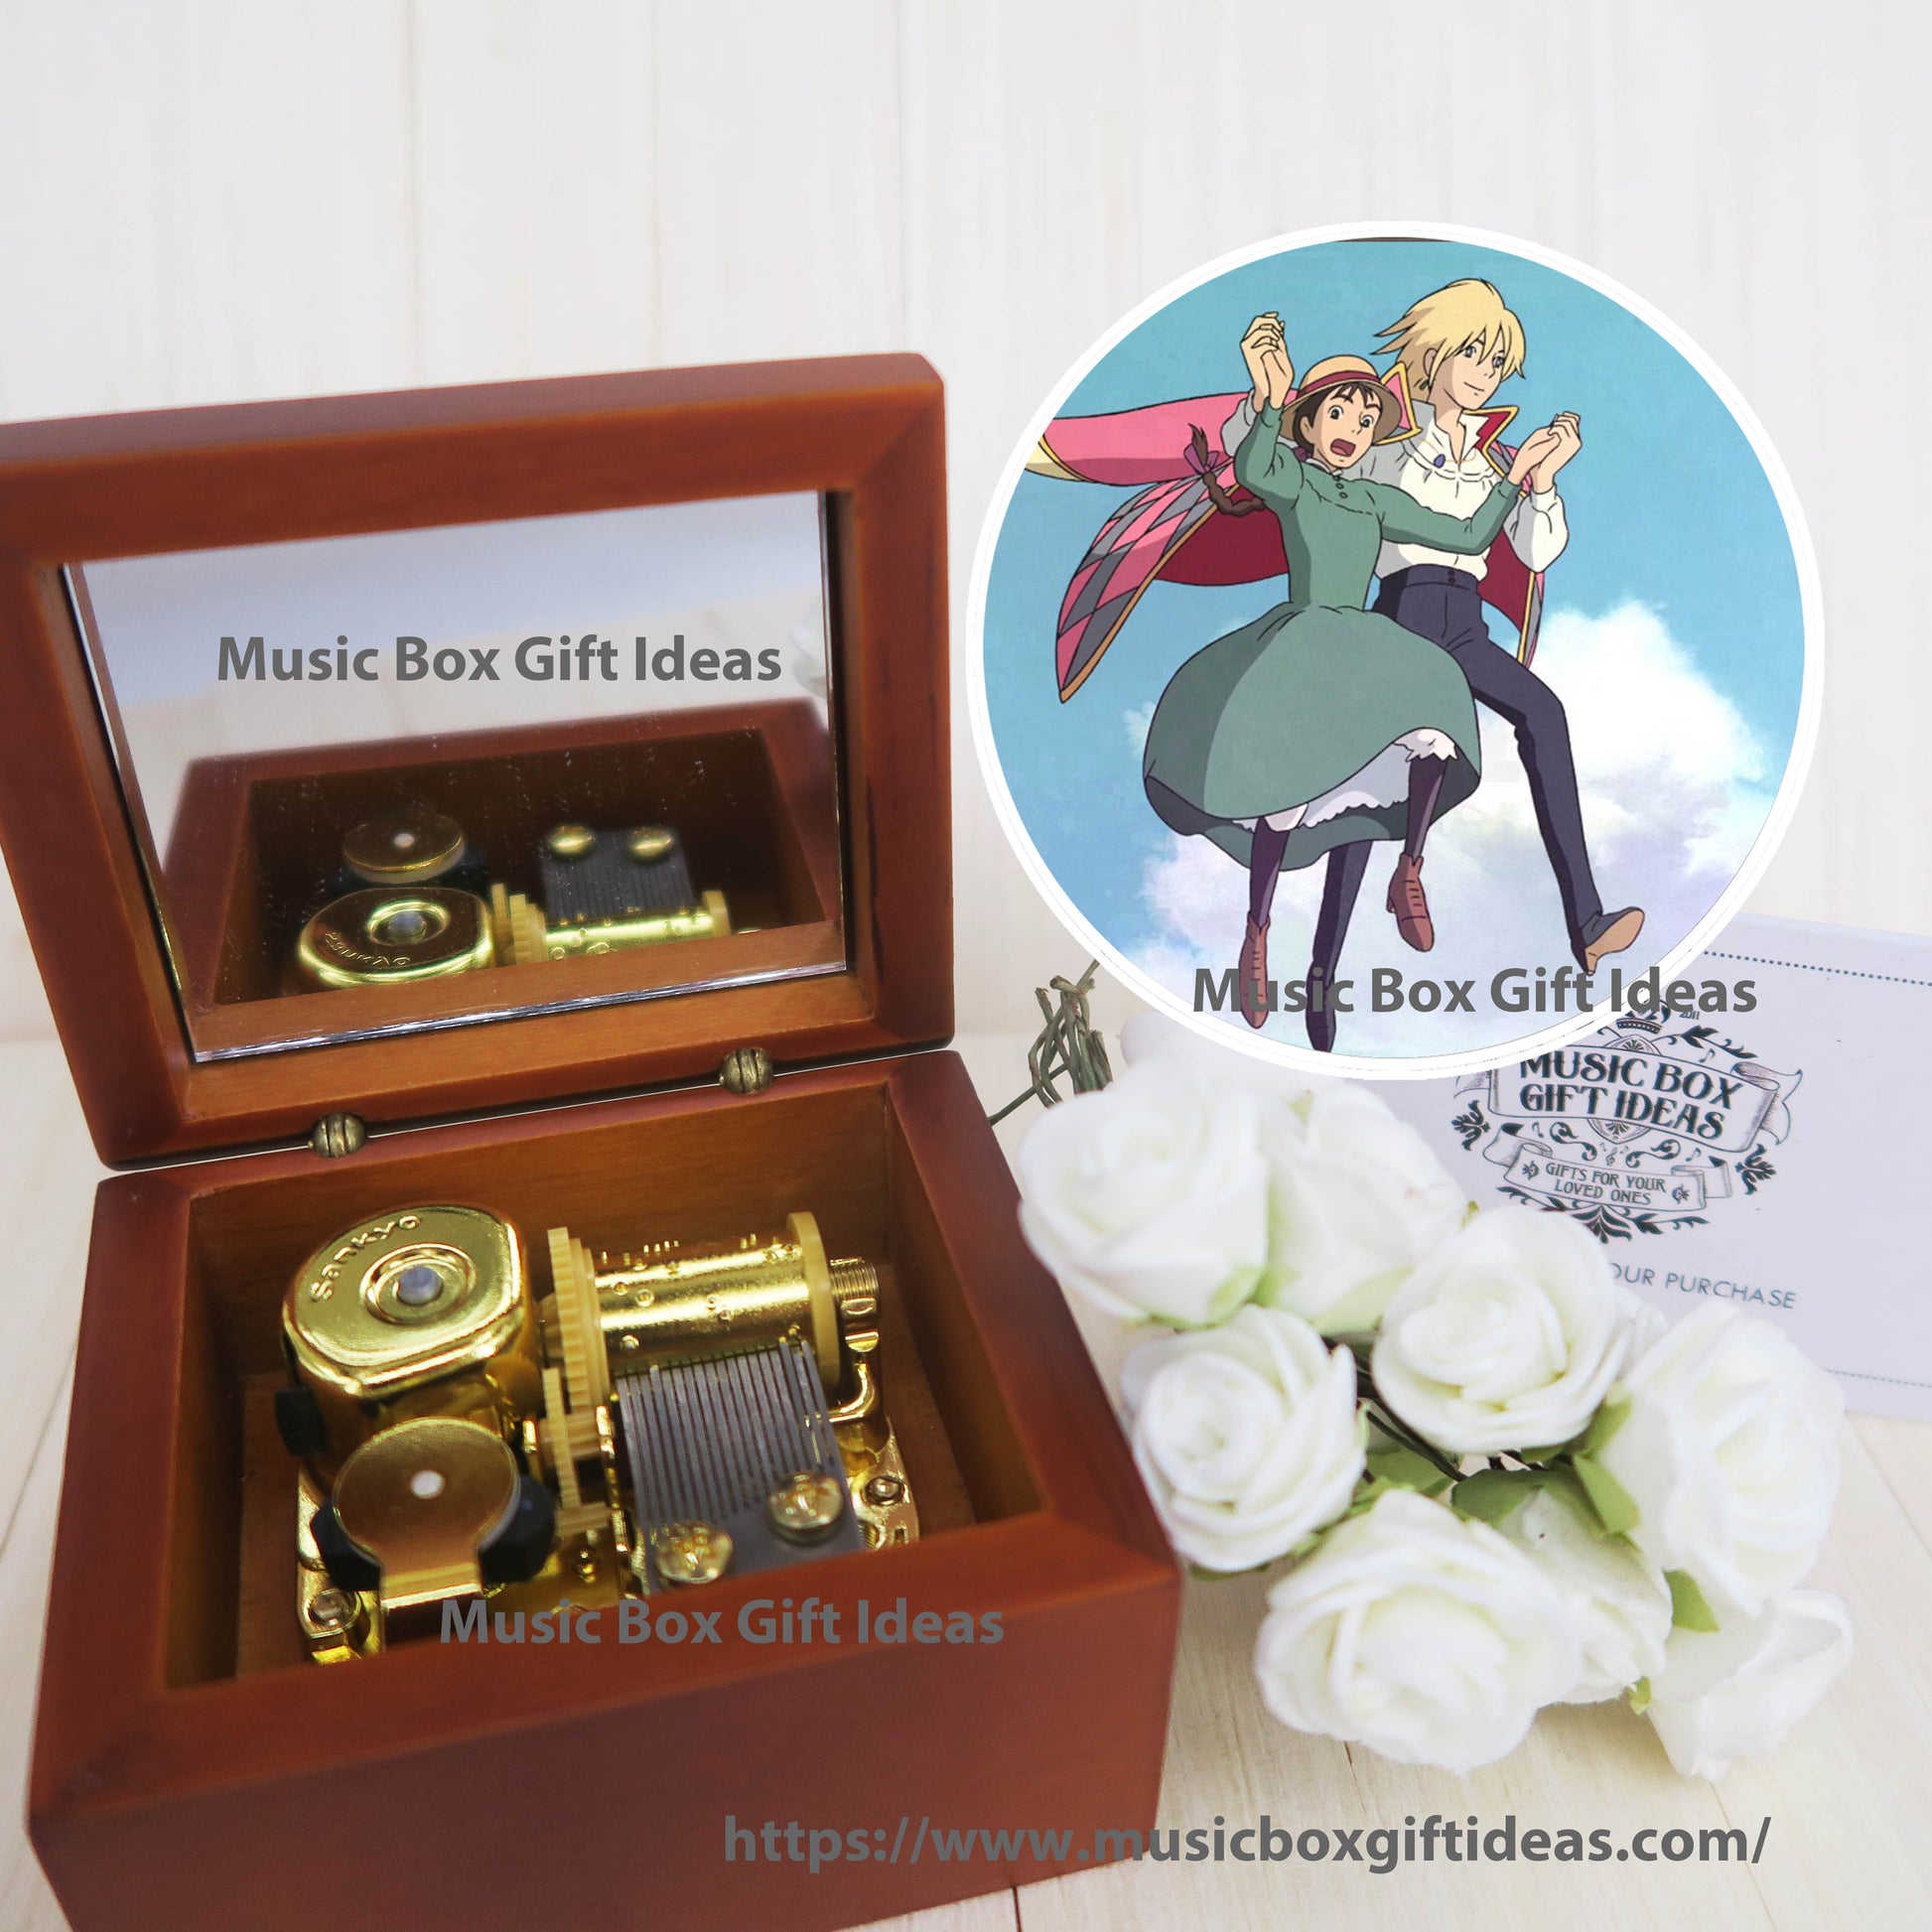 Howl's Moving Castle The Promise of The World from Studio Ghibli 18-Note Music Box Gift (Wooden Clockwork) - Music Box Gift Ideas